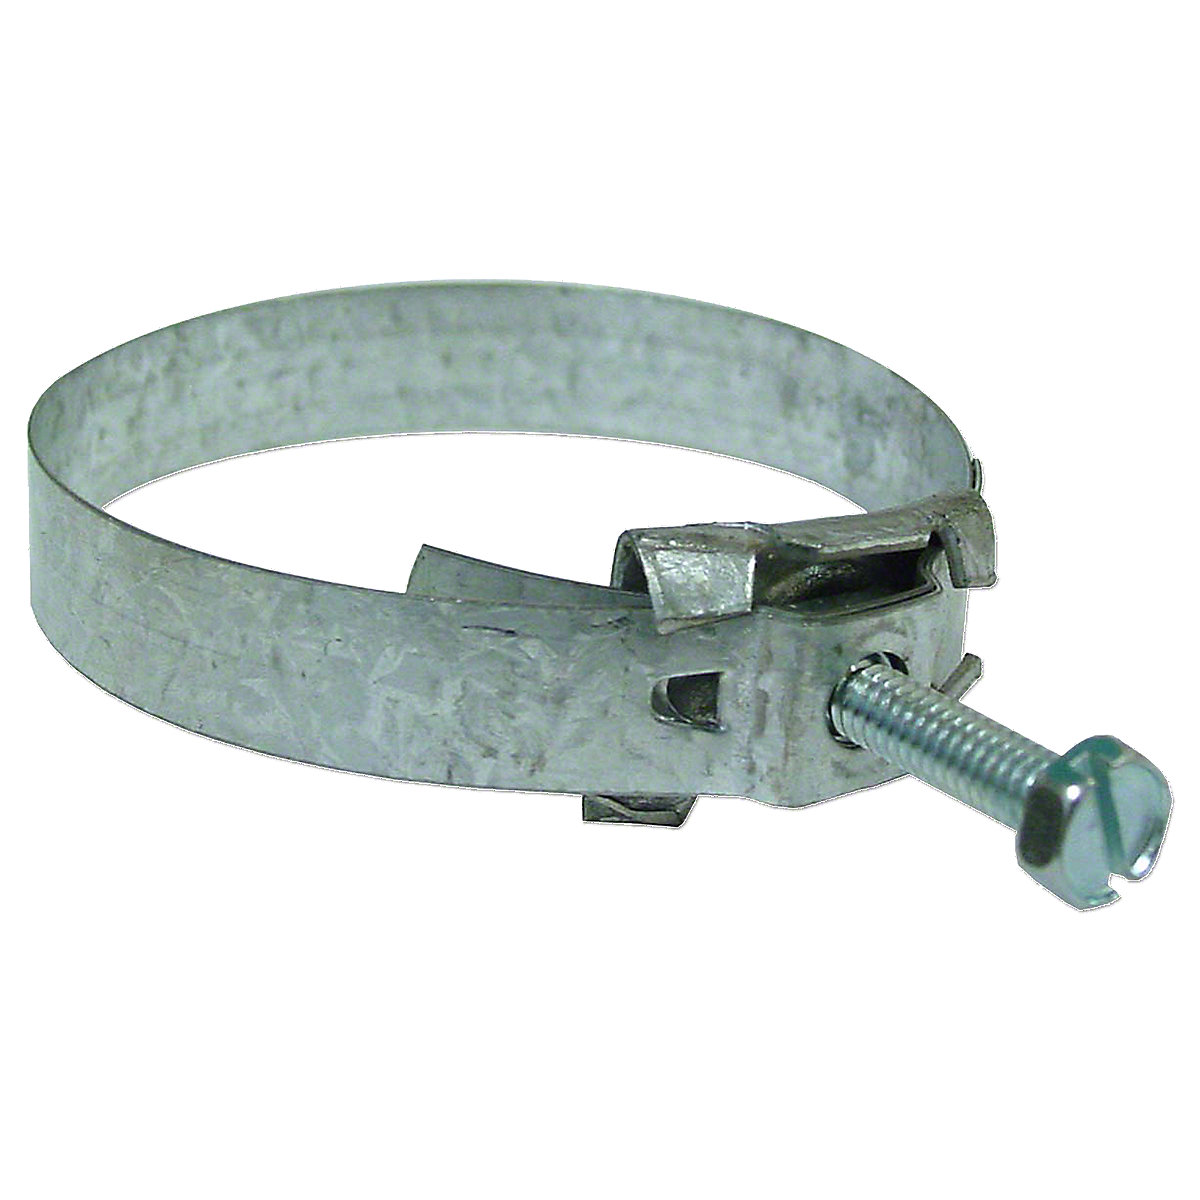 This is an original style hose clamp. Make sure that the Outside diameter of your hose measures between 2.175 and 2.500.